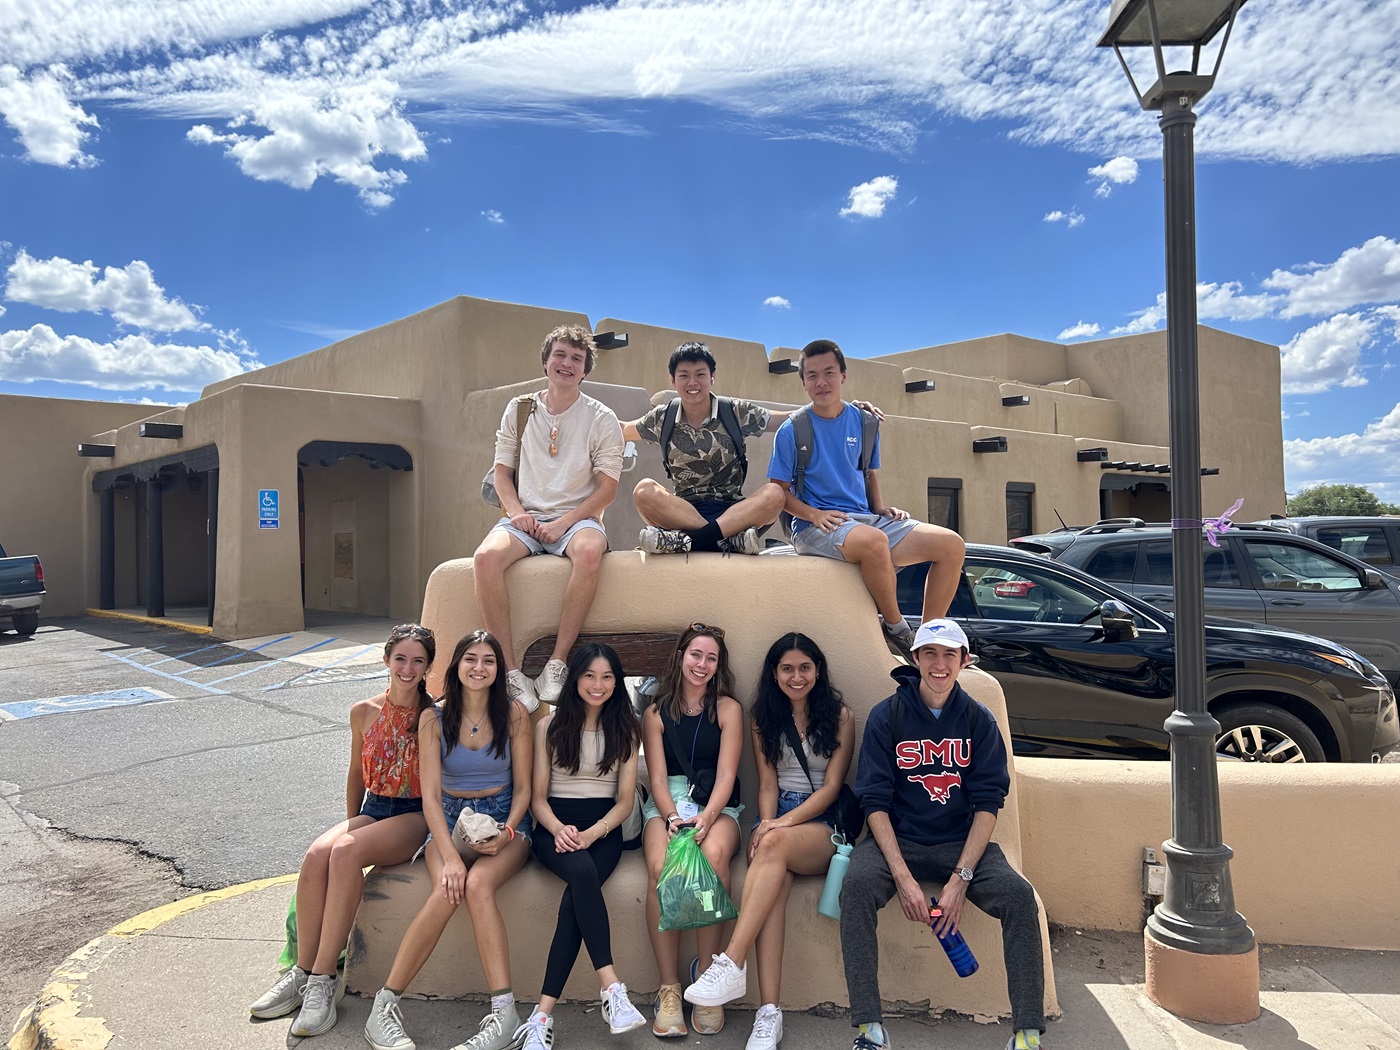 Group of students sitting on a Adobe structure on the sidewalk of a town all smiling at the camera 